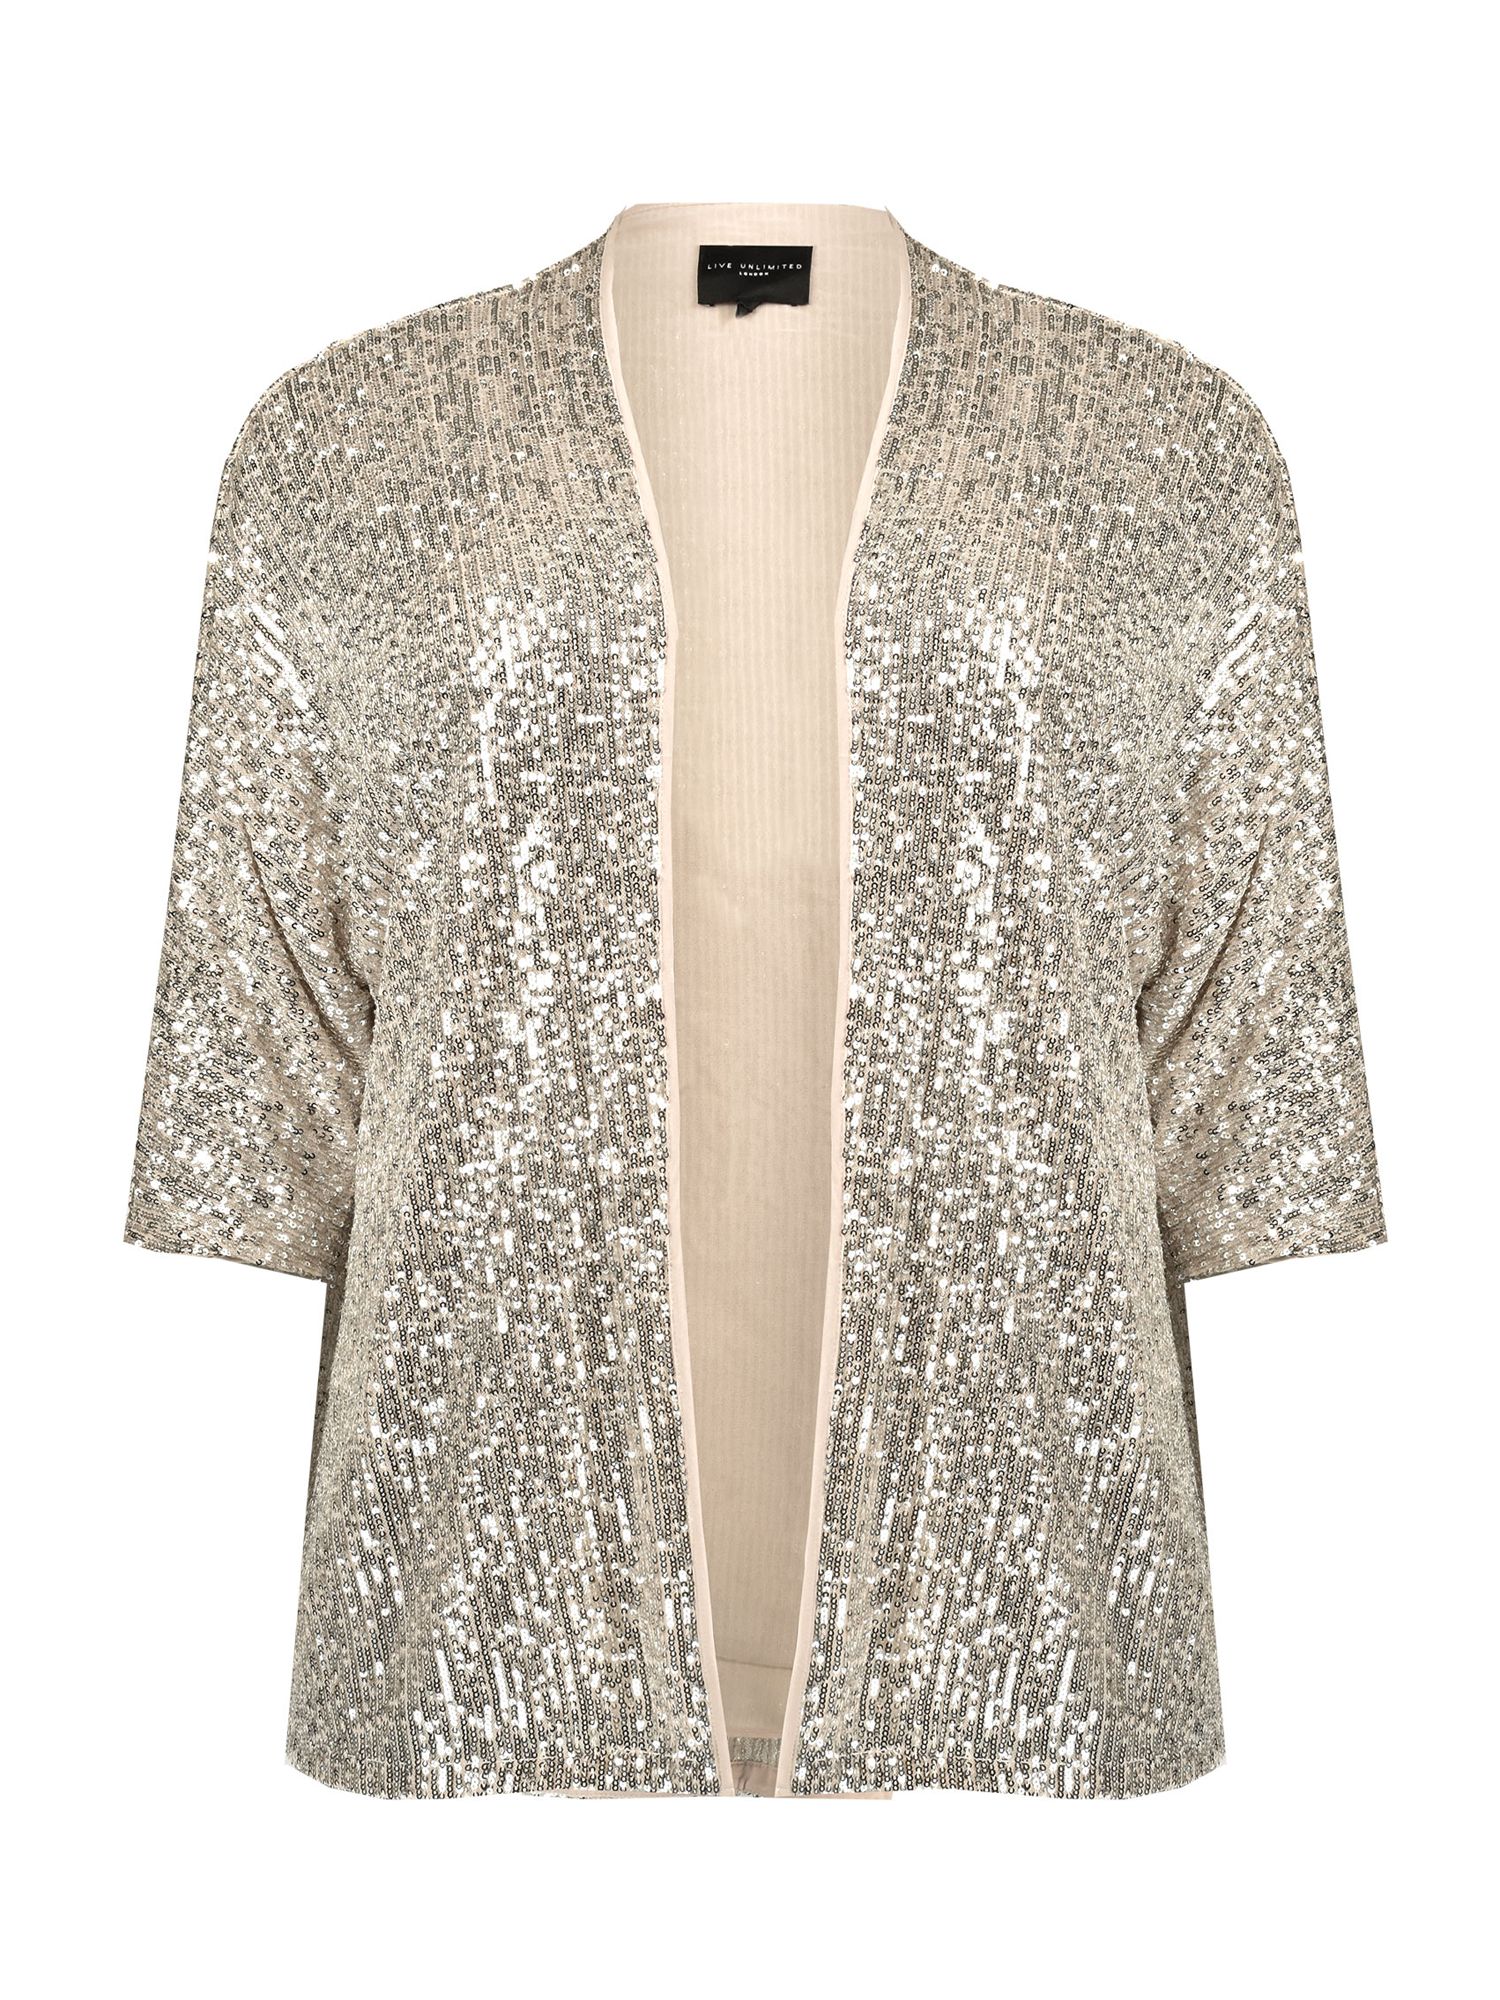 Live Unlimited Sequin Jacket, Champagne at John Lewis & Partners